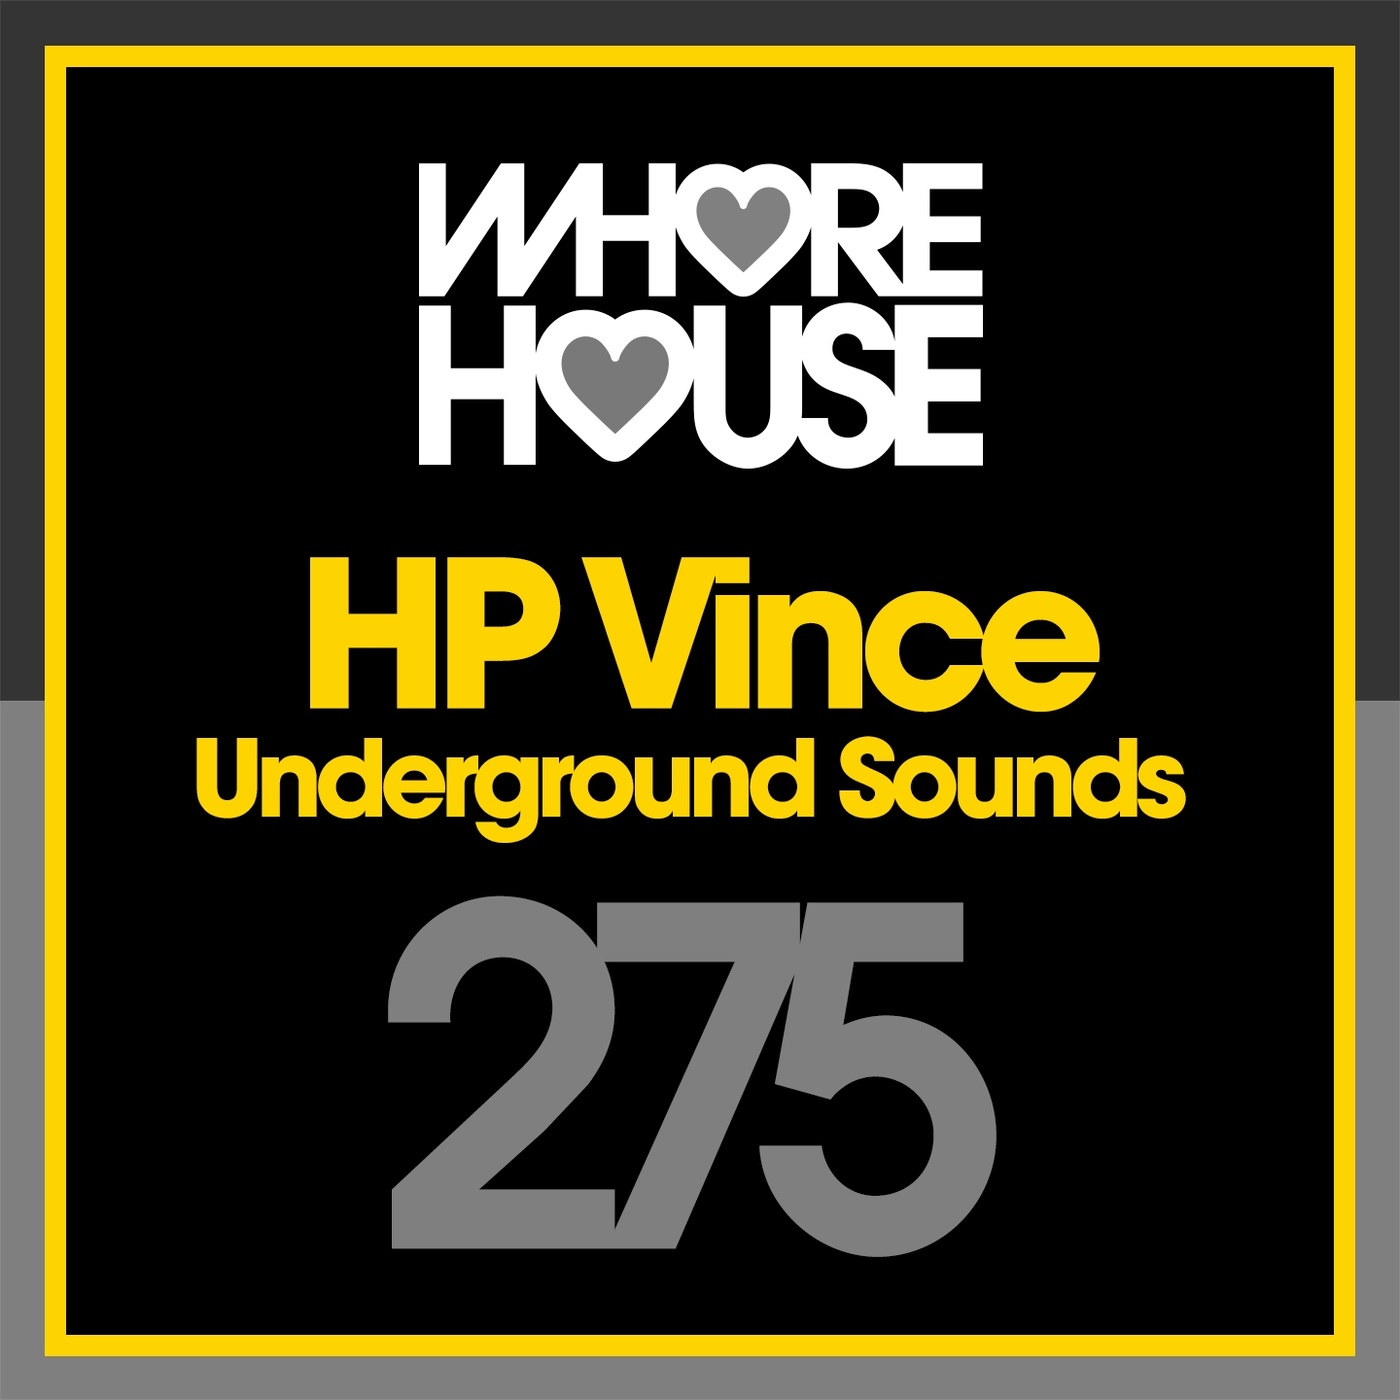 HP Vince - Underground Sounds / Whore House Recordings